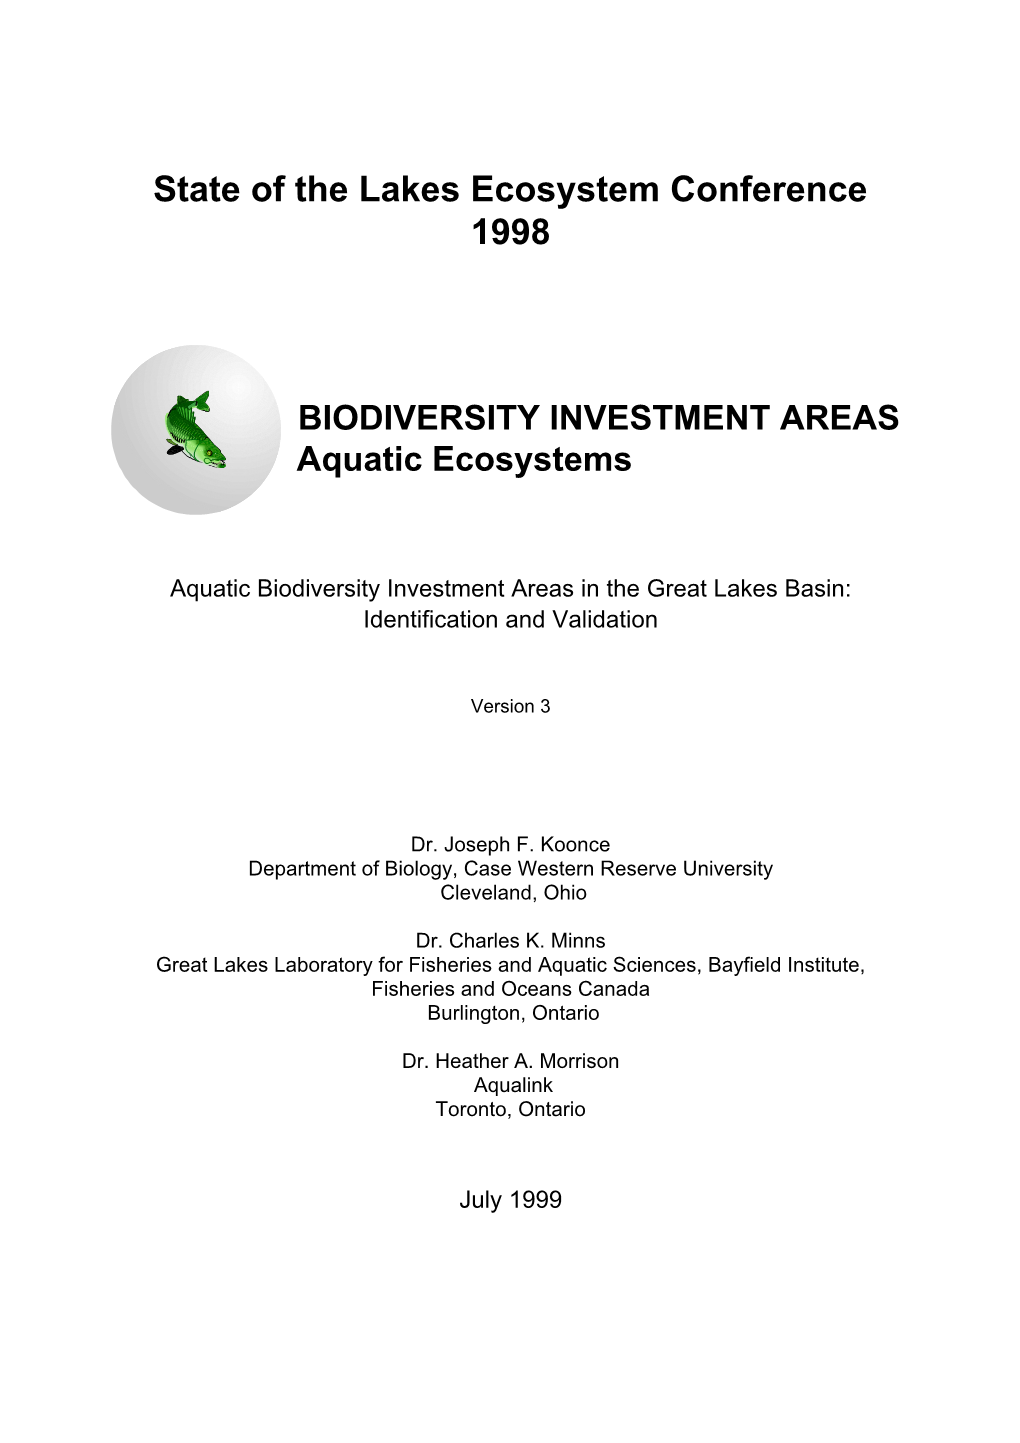 Aquatic Biodiversity Investment Areas in the Great Lakes Basin: Identification and Validation